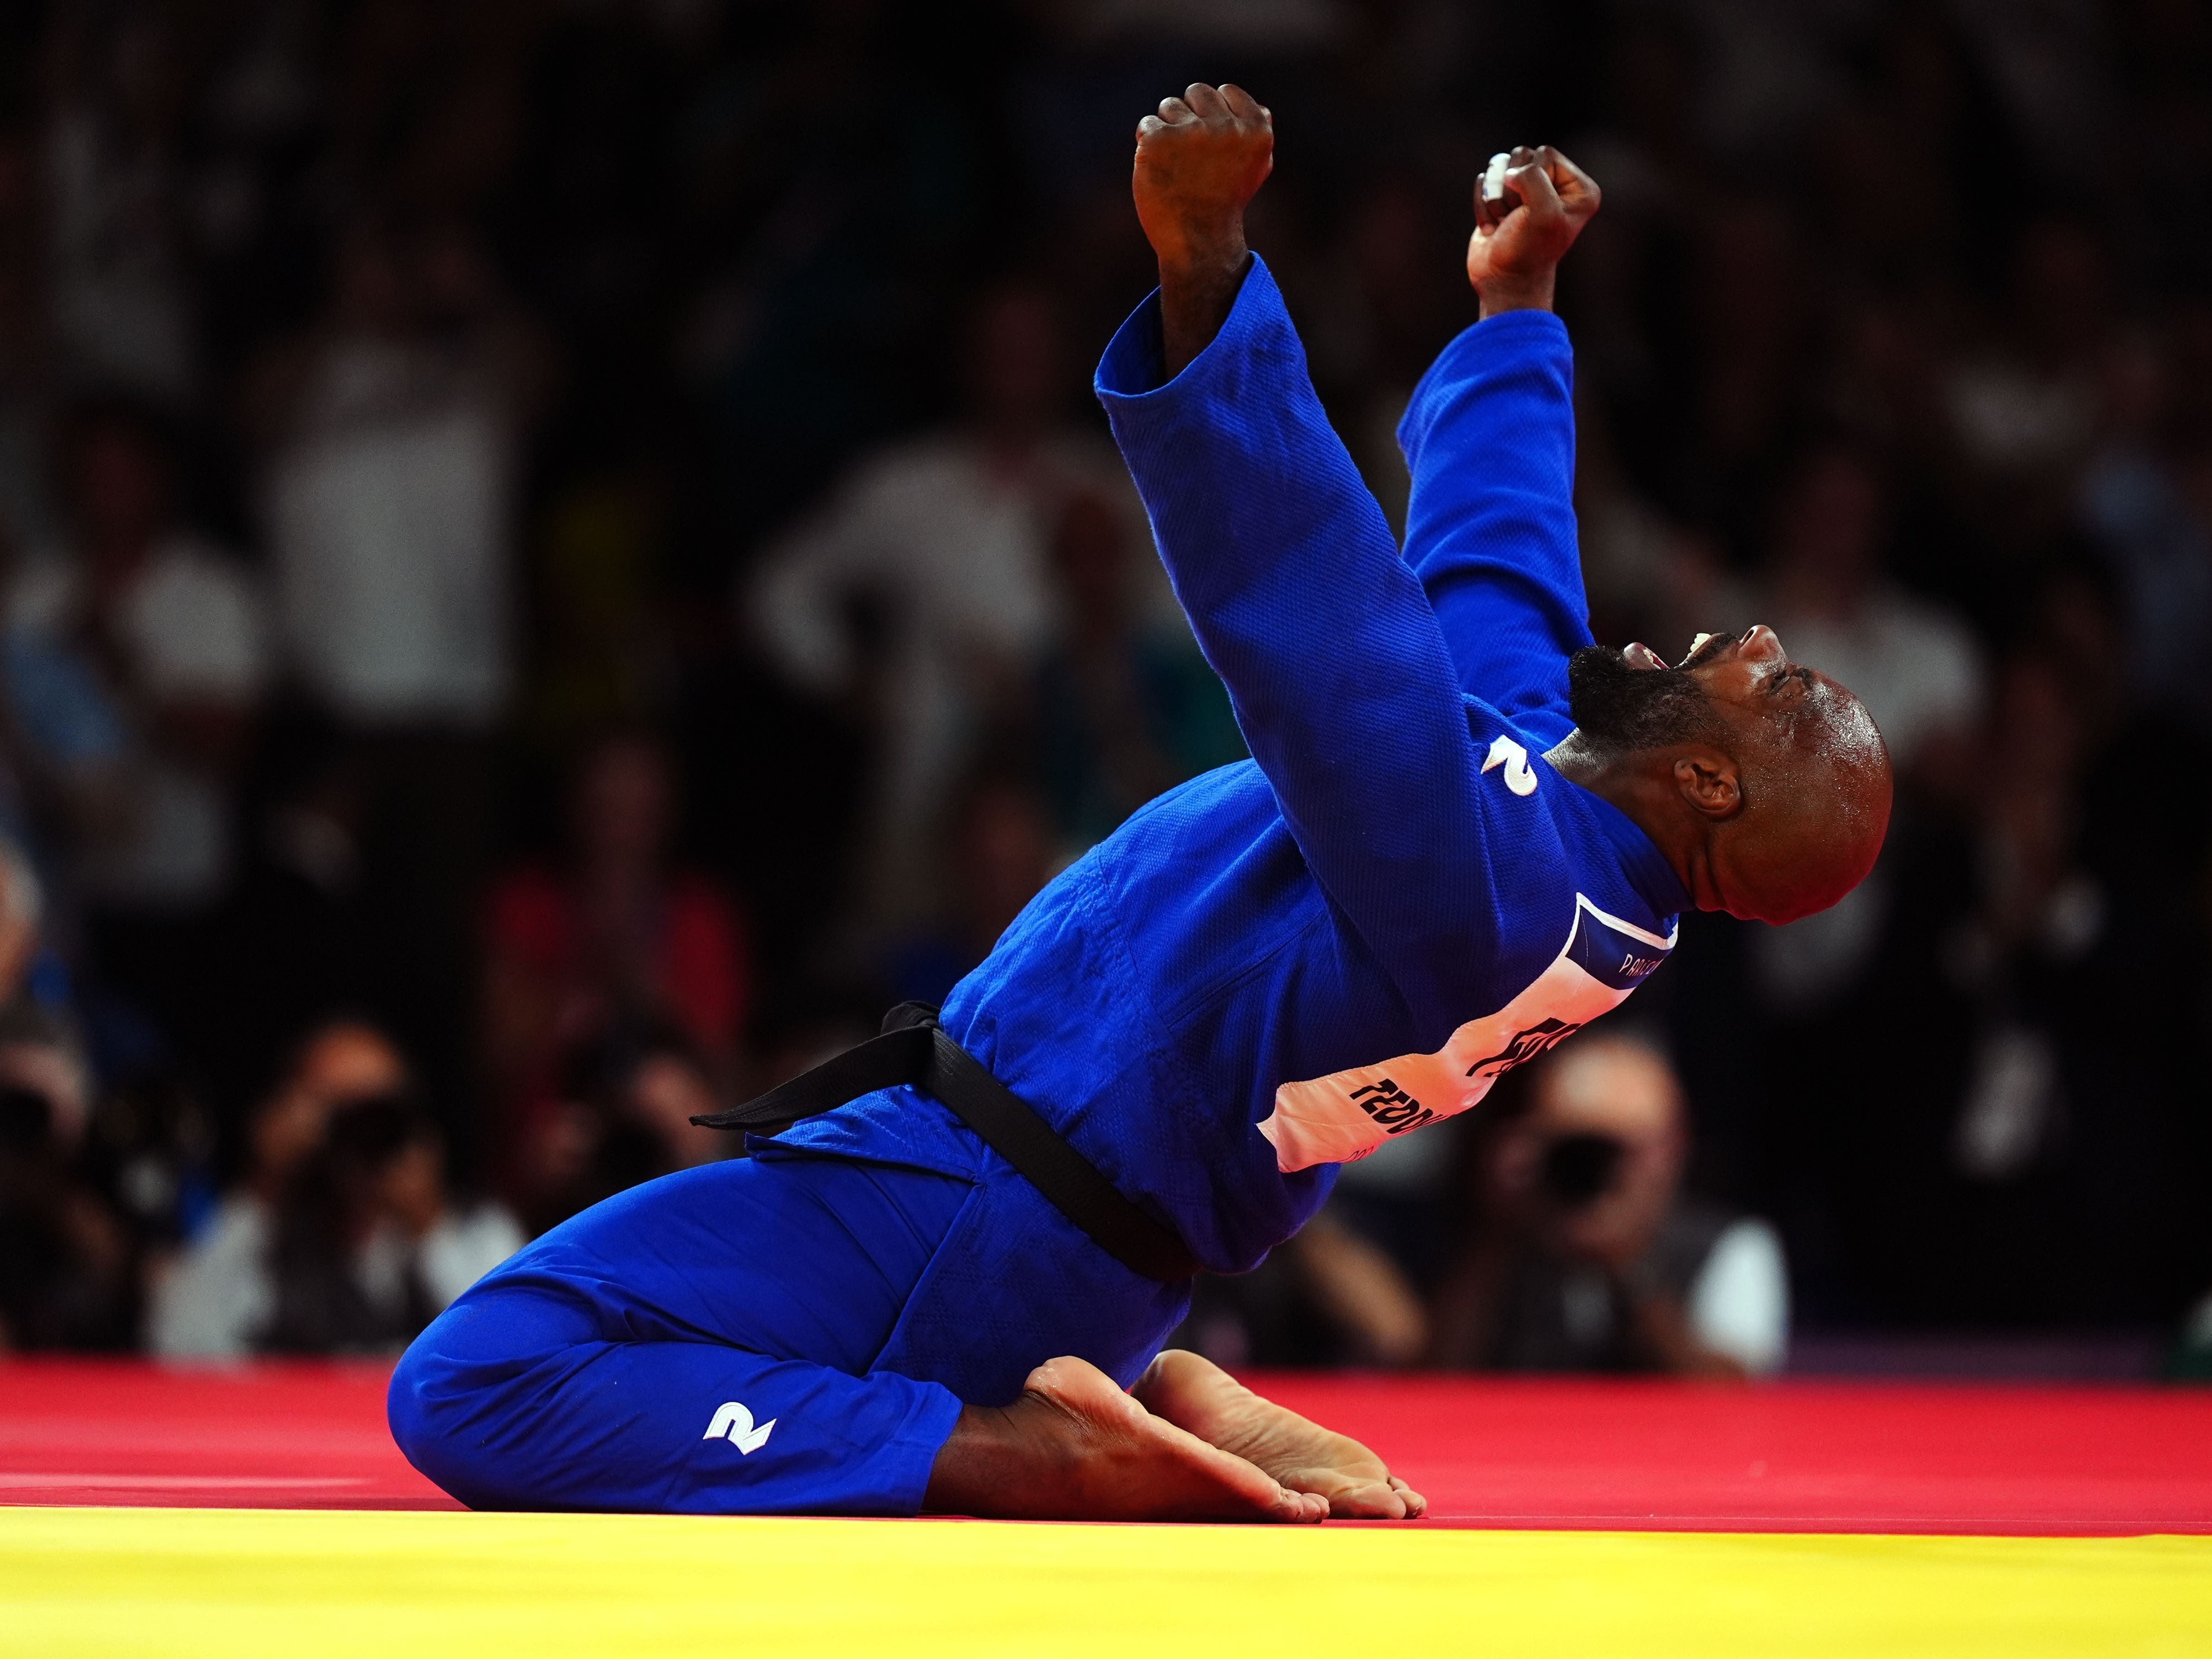 Teddy Riner is toast of France after becoming most successful judoka in history